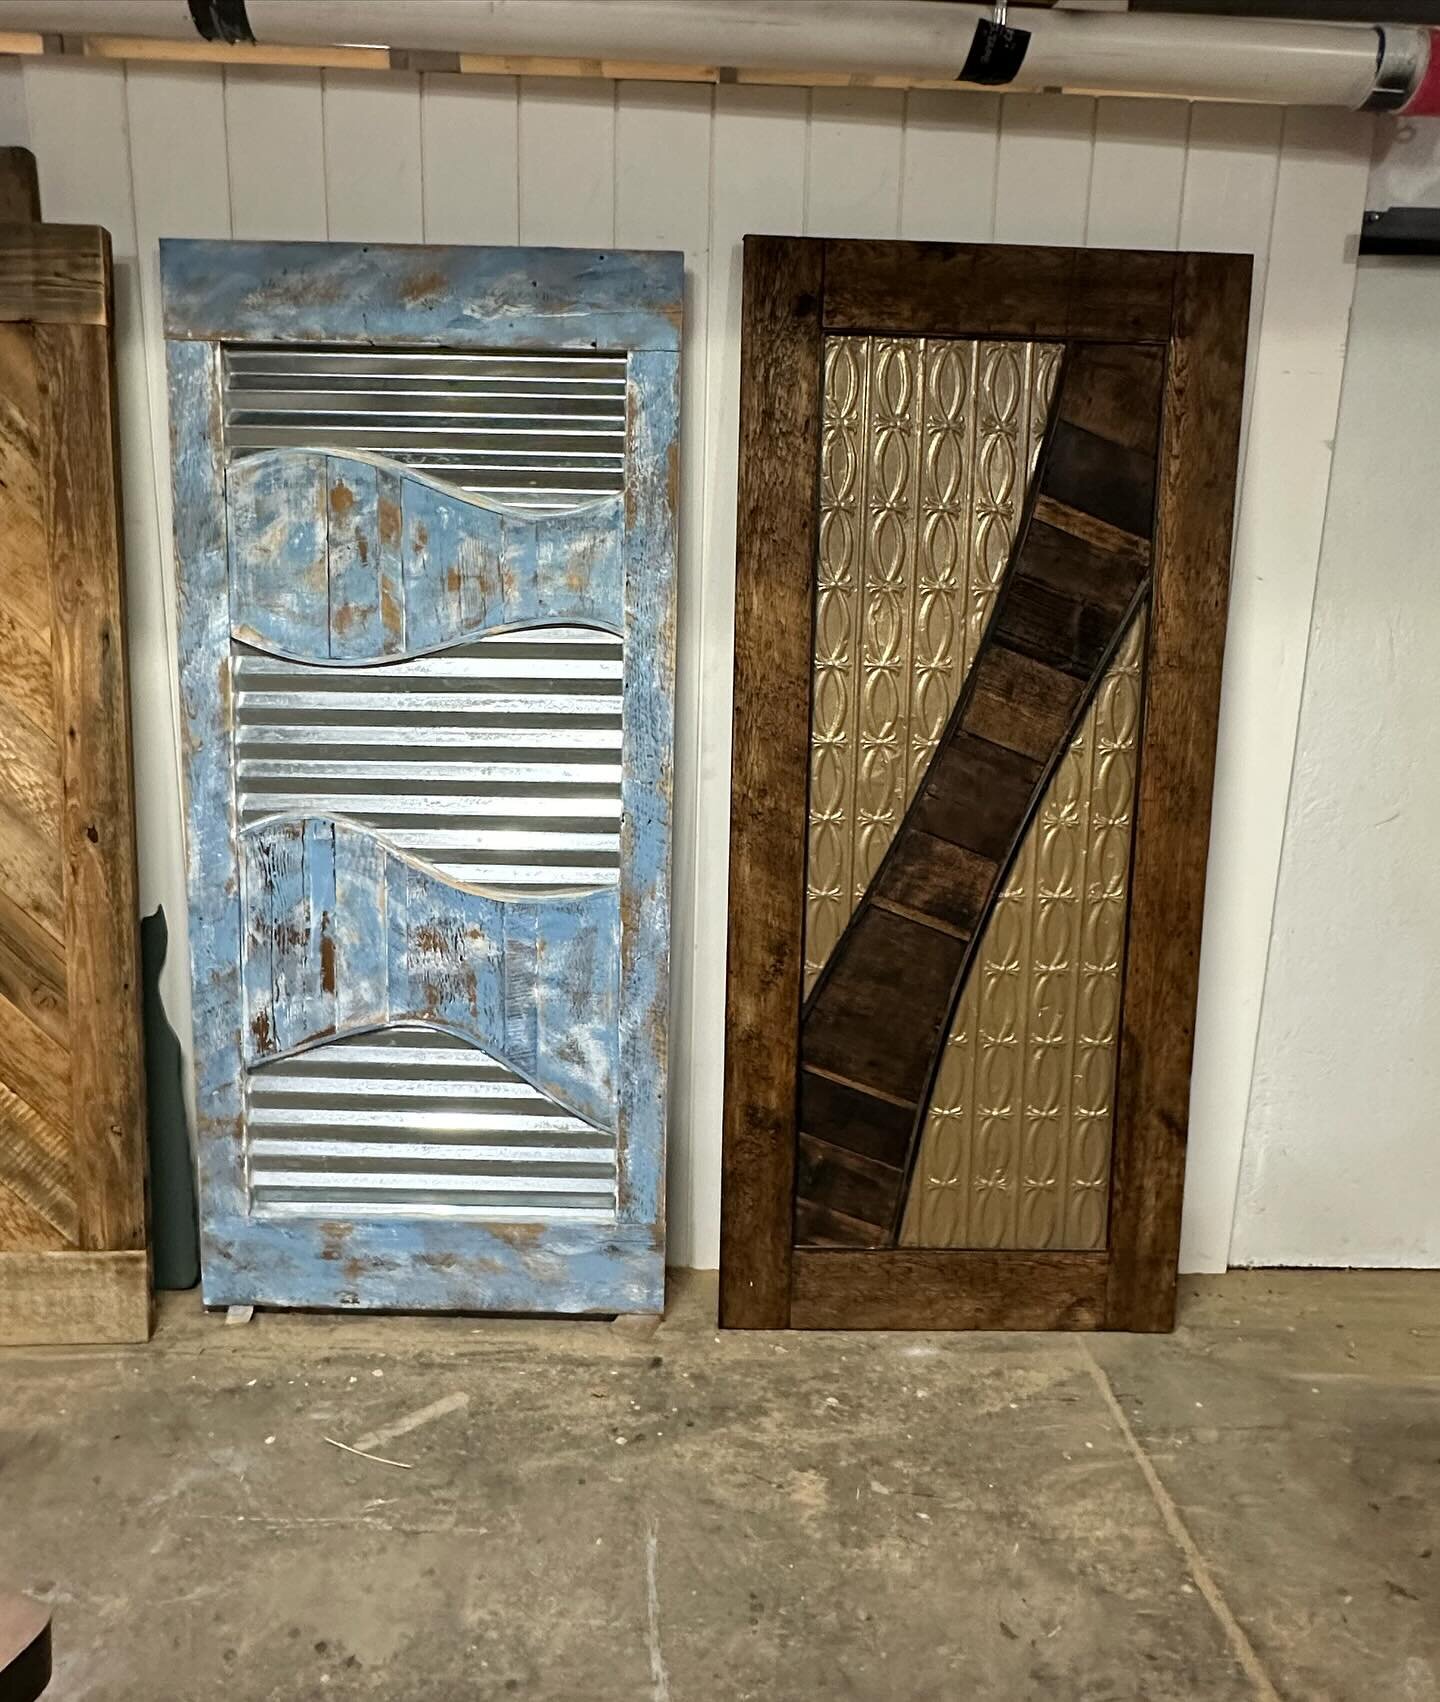 Northshore Barn Doors creates custom doors and complete installation. 

The art door is a real statement piece that becomes the centerpiece and focal point of a room and here are some examples of new doors we are offering now along with a couple of p